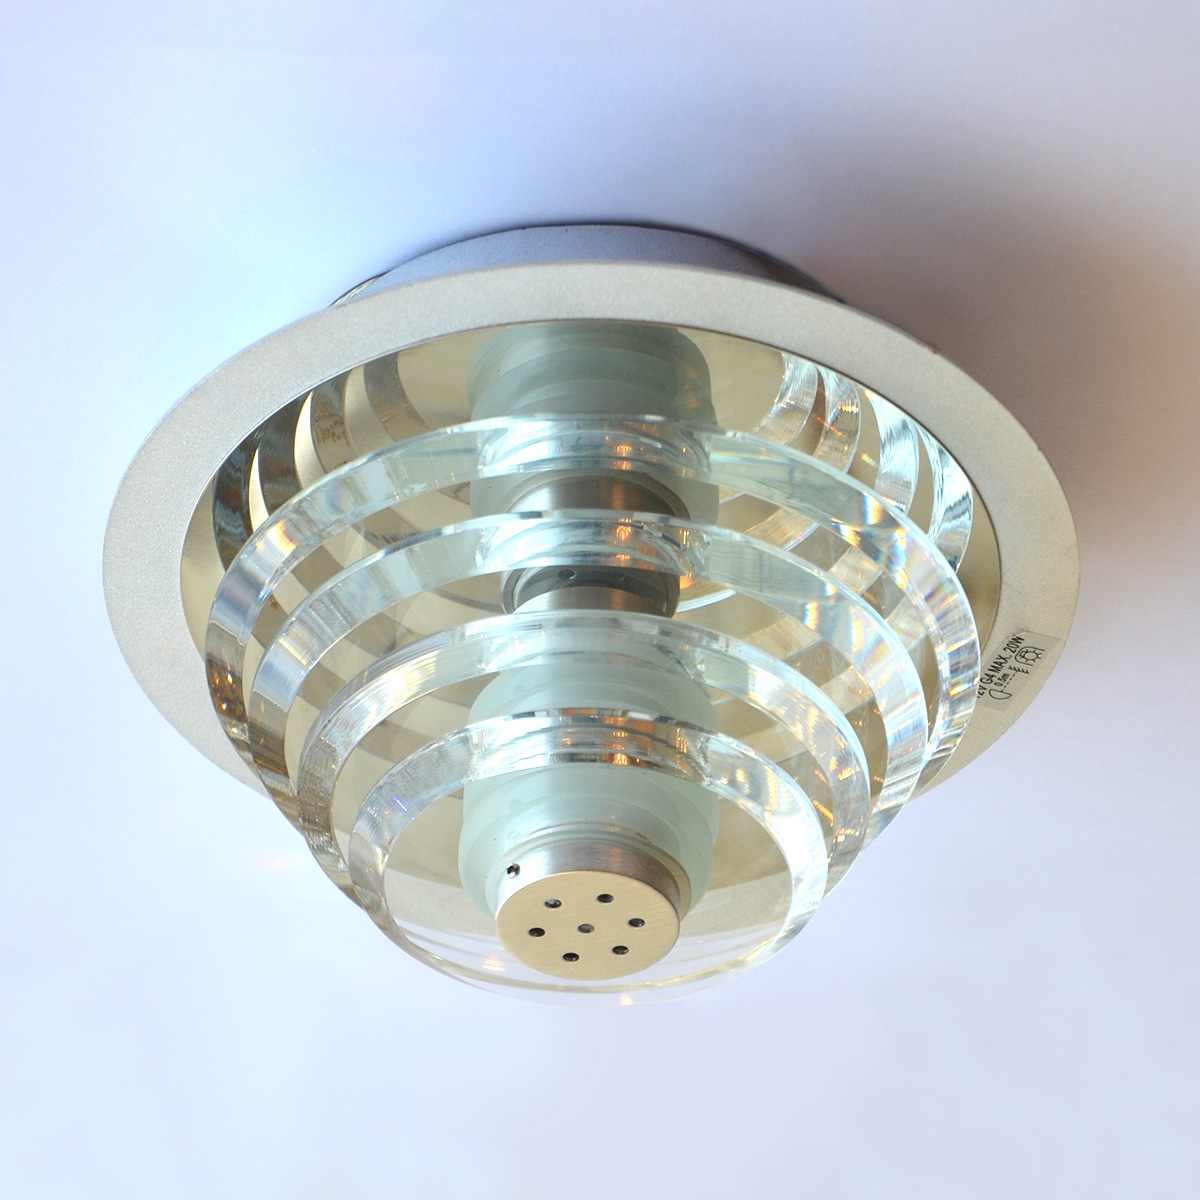 Indoor Decorative Recessed Ceiling Light MB60026 with Bulb- Chrome